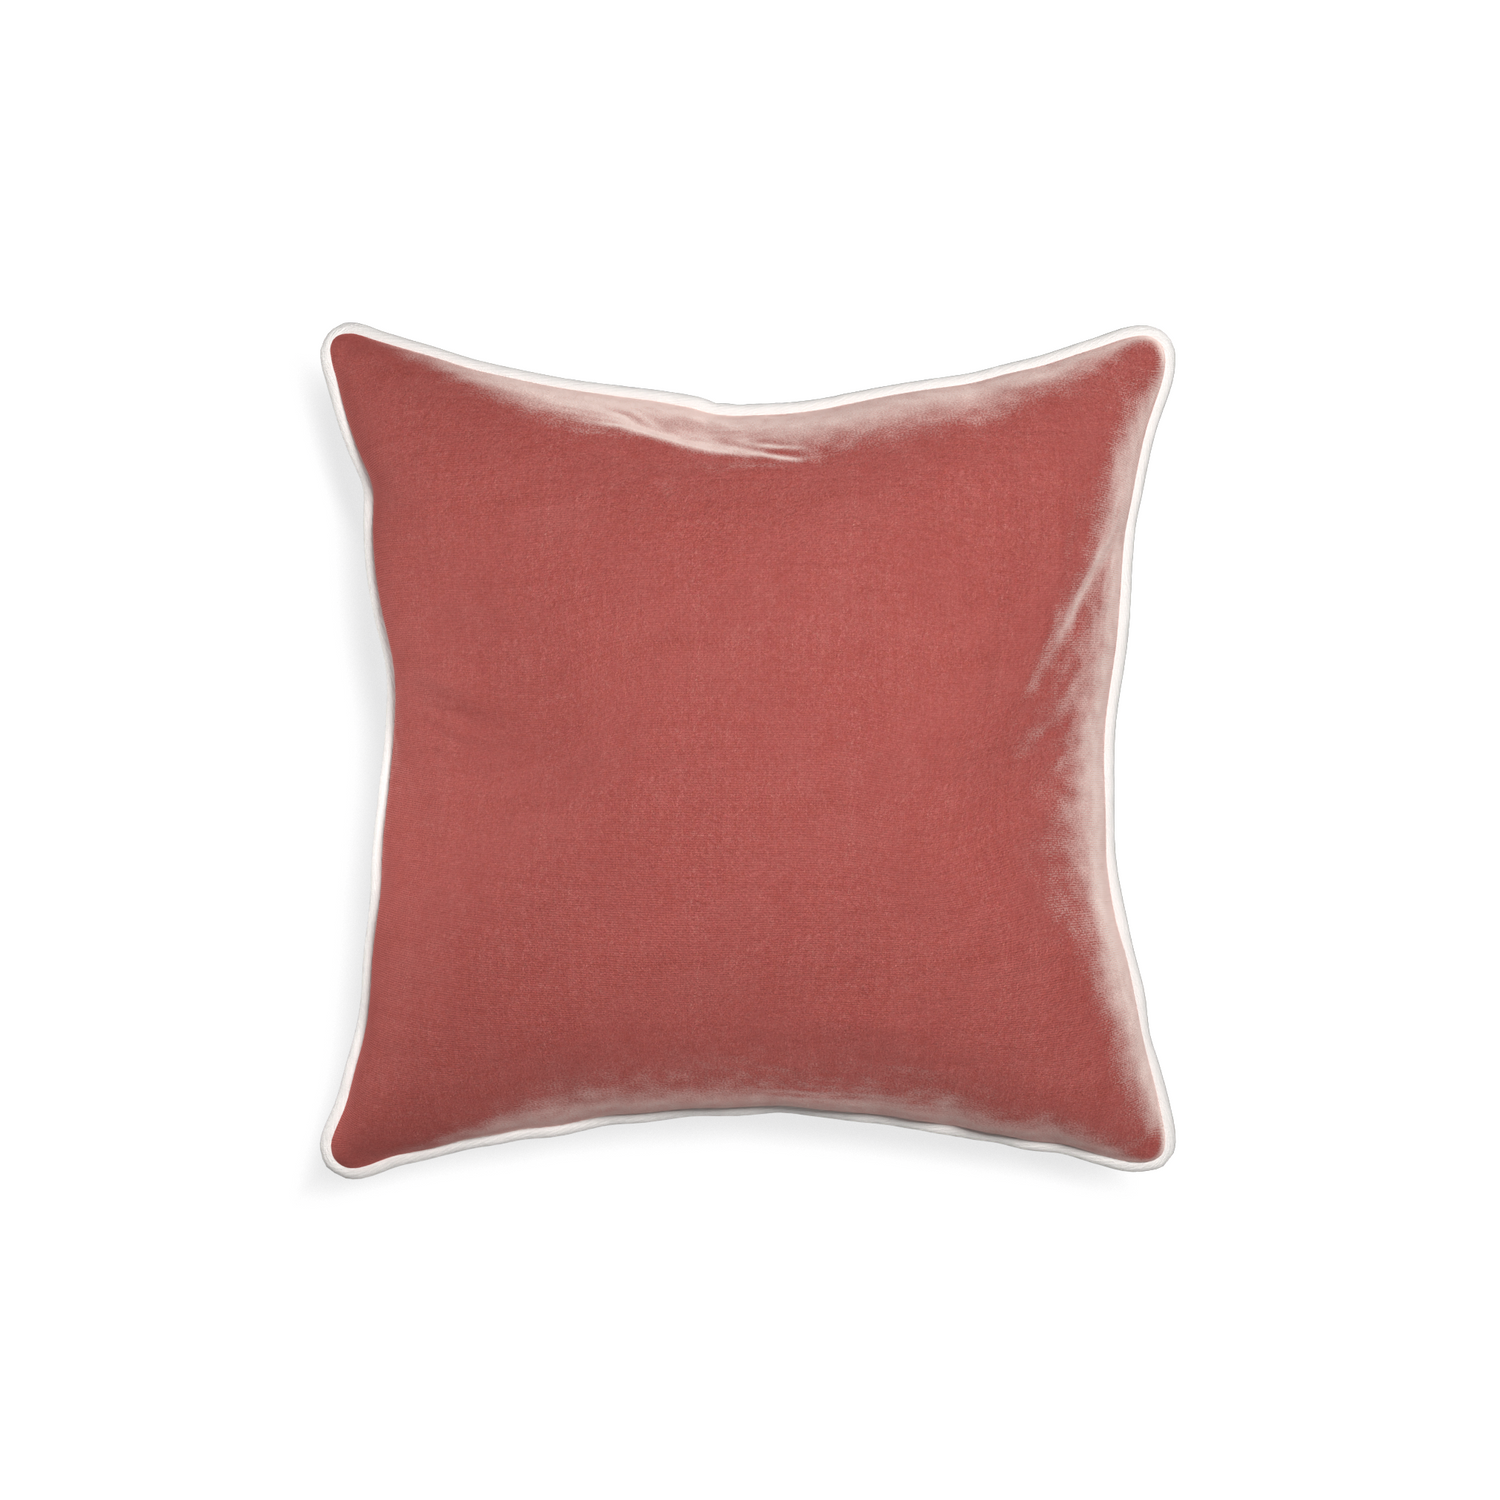 18-square cosmo velvet custom pillow with snow piping on white background